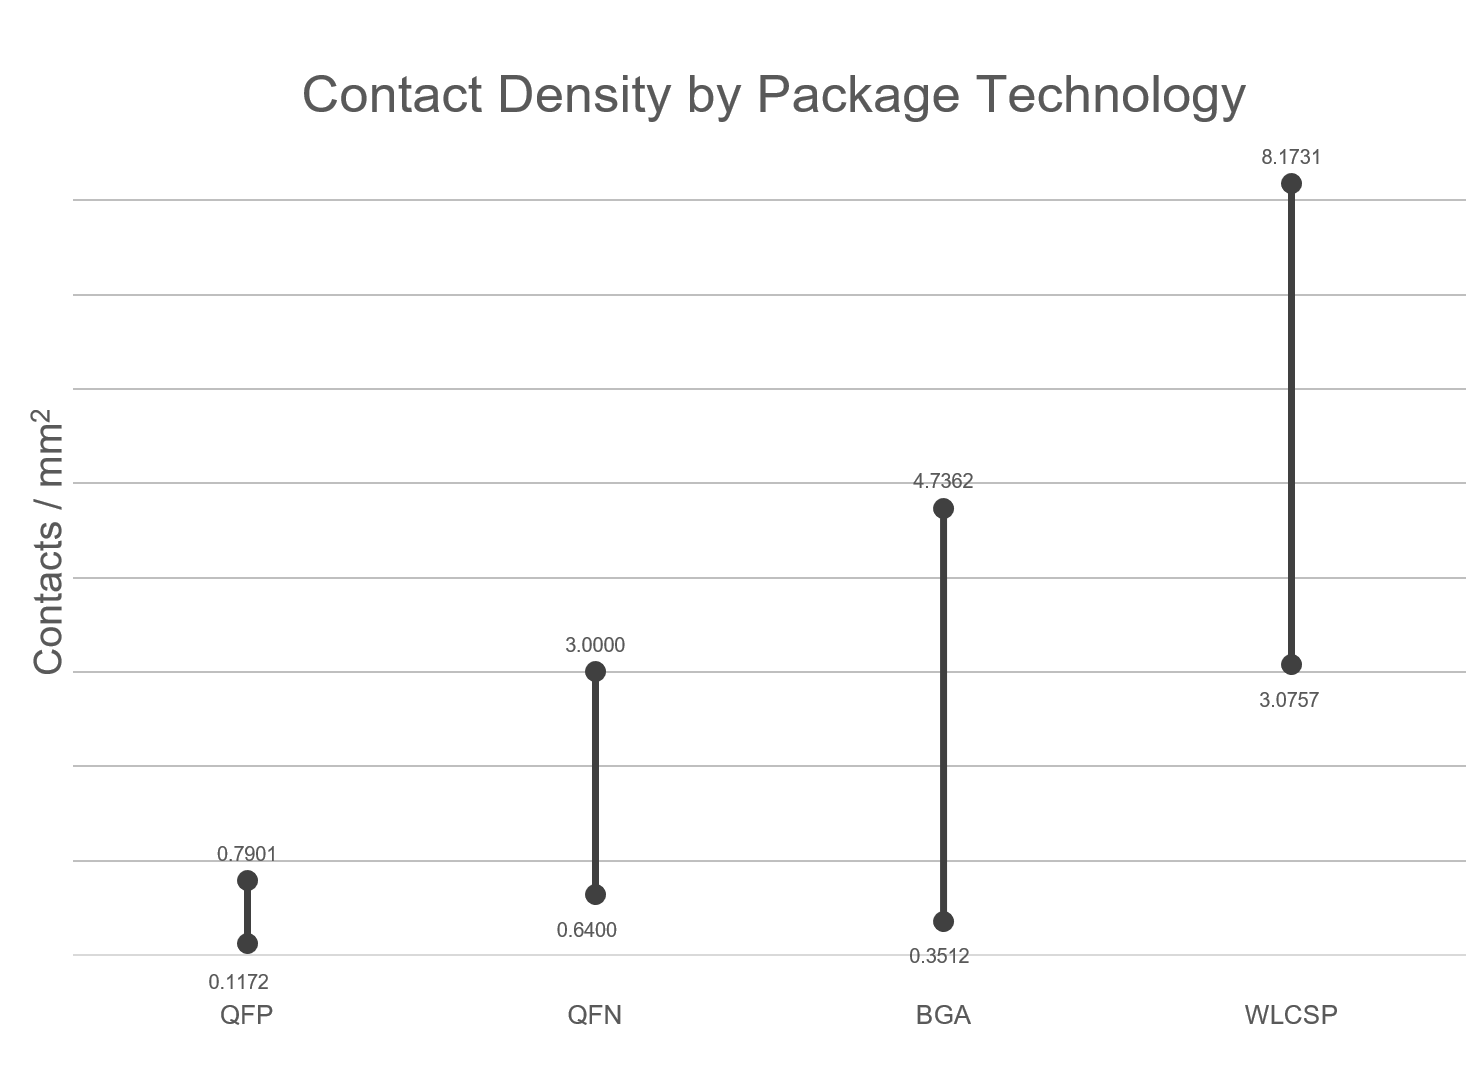 Contact Density vs PAckage Technology